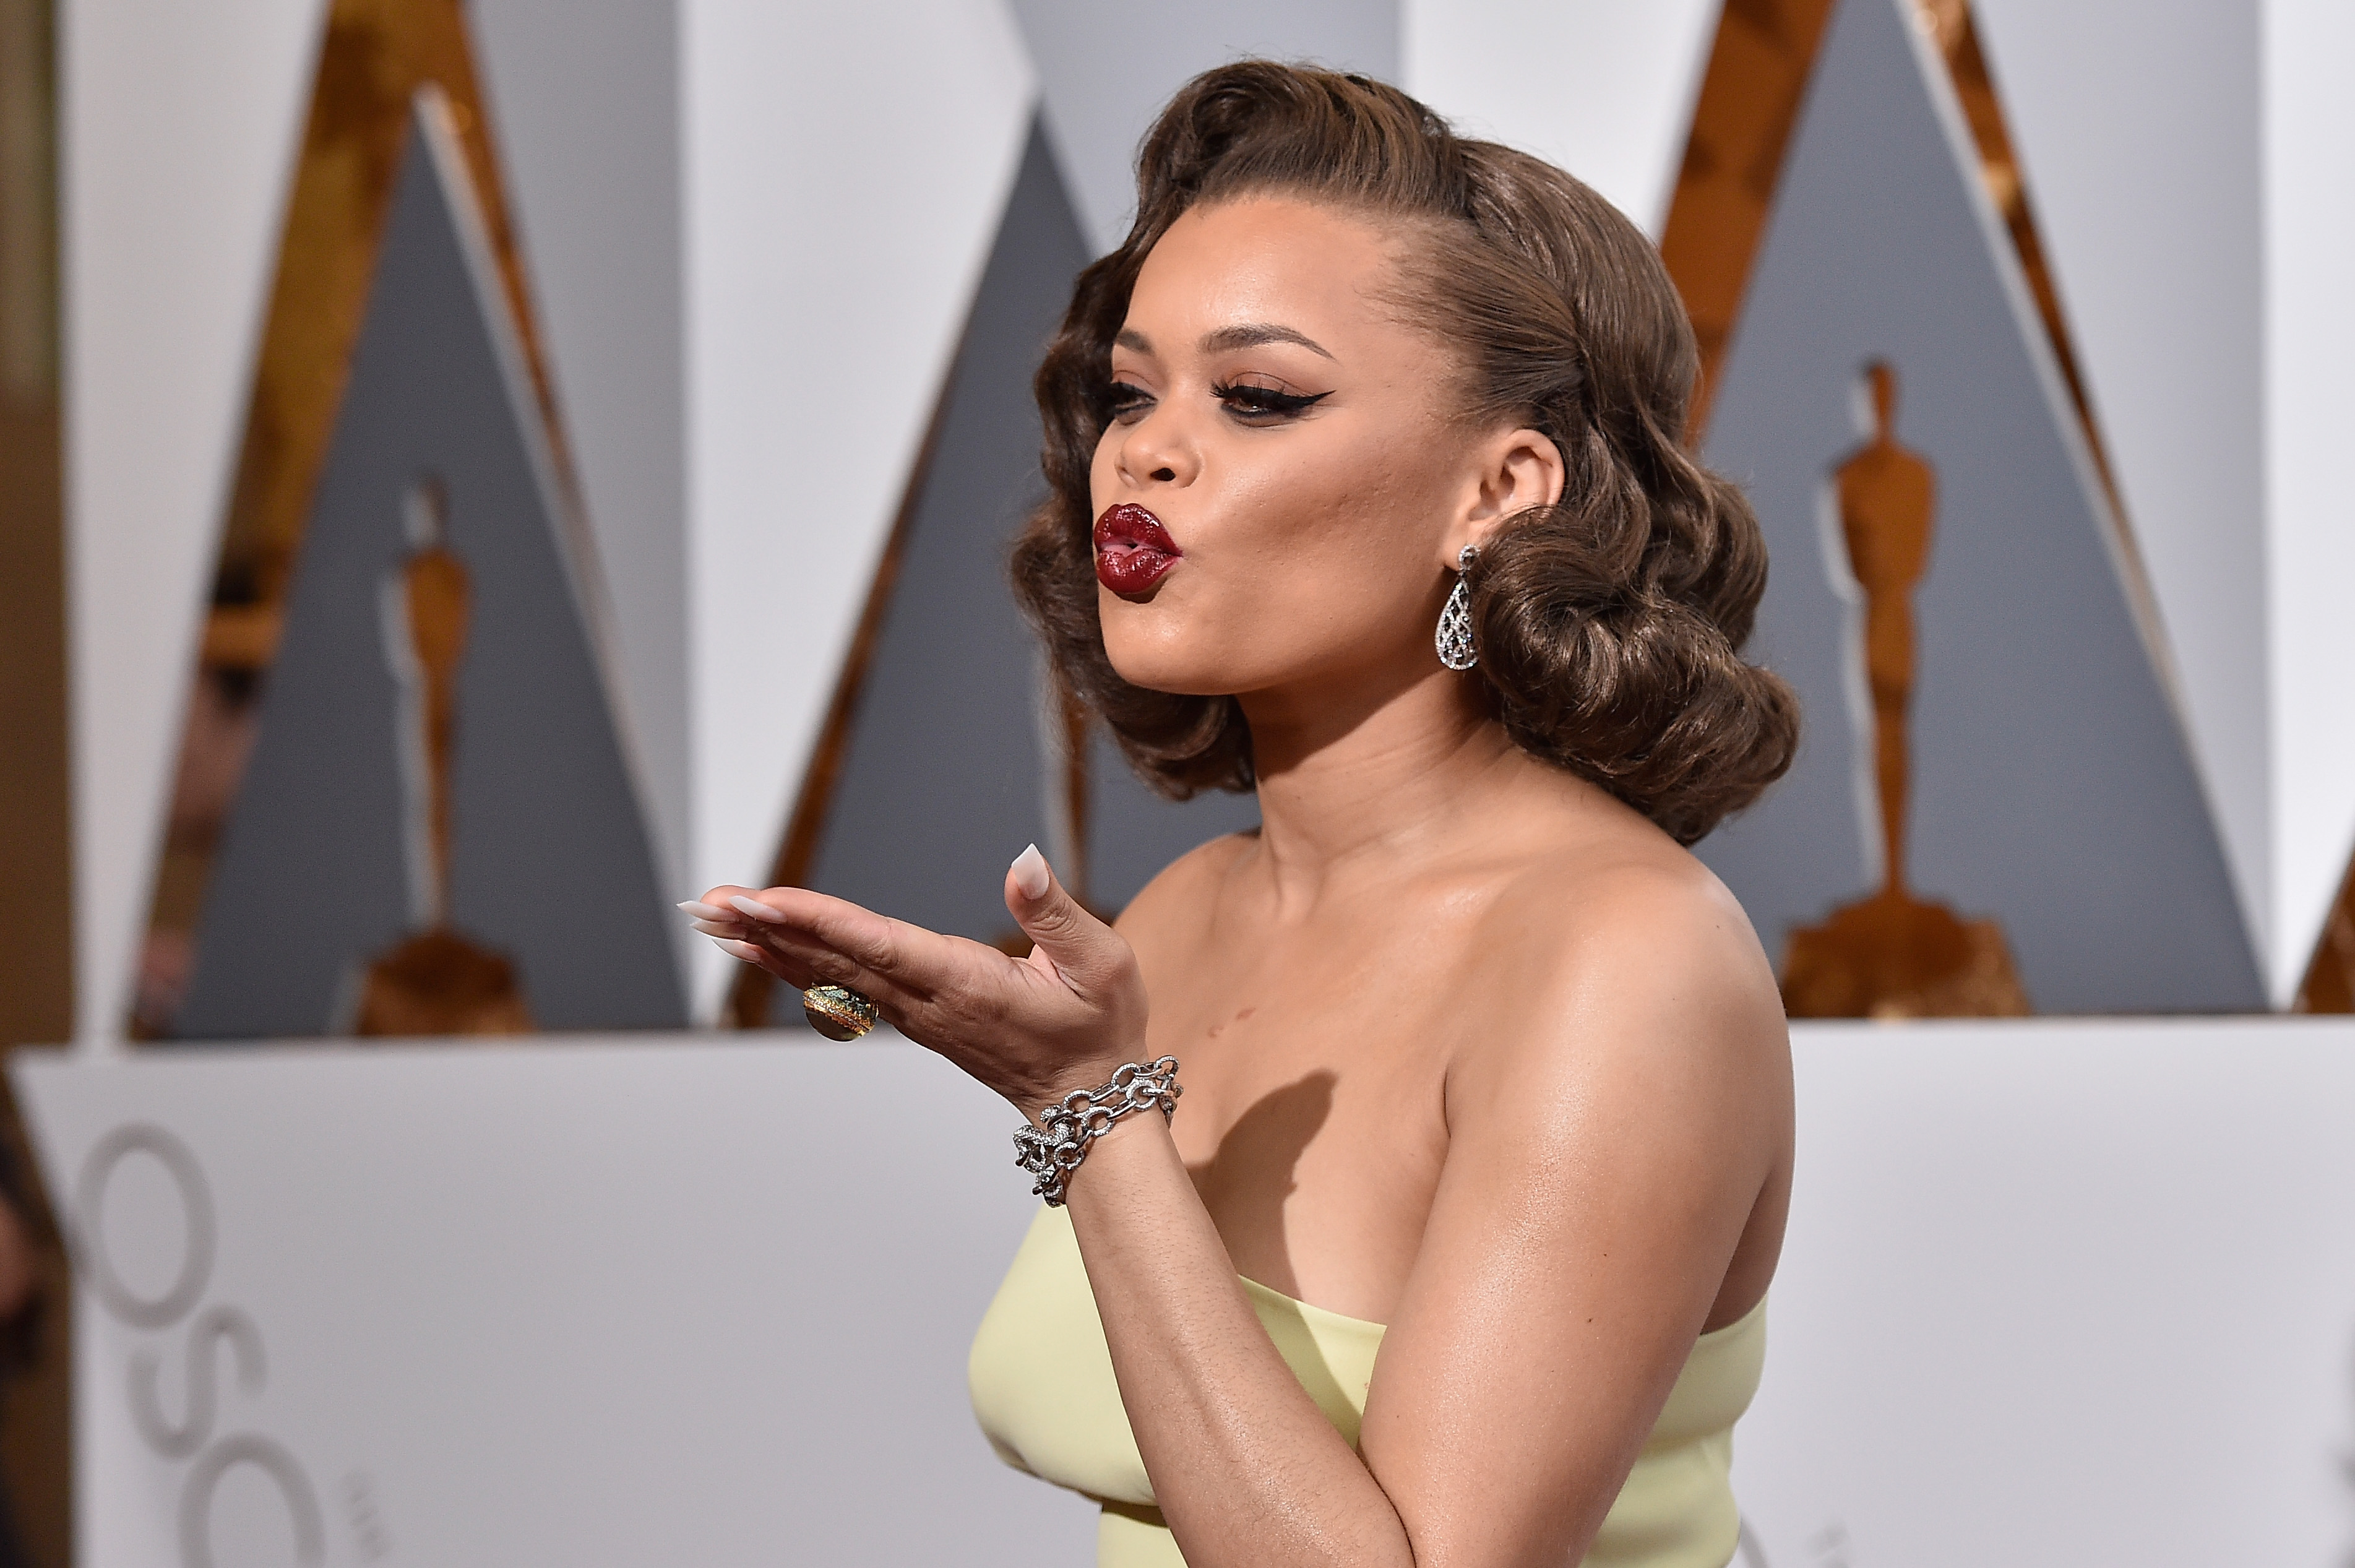 Recording artist Andra Day attends the 88th Annual Academy Awards. (Photo by Kevork Djansezian/Getty Images)